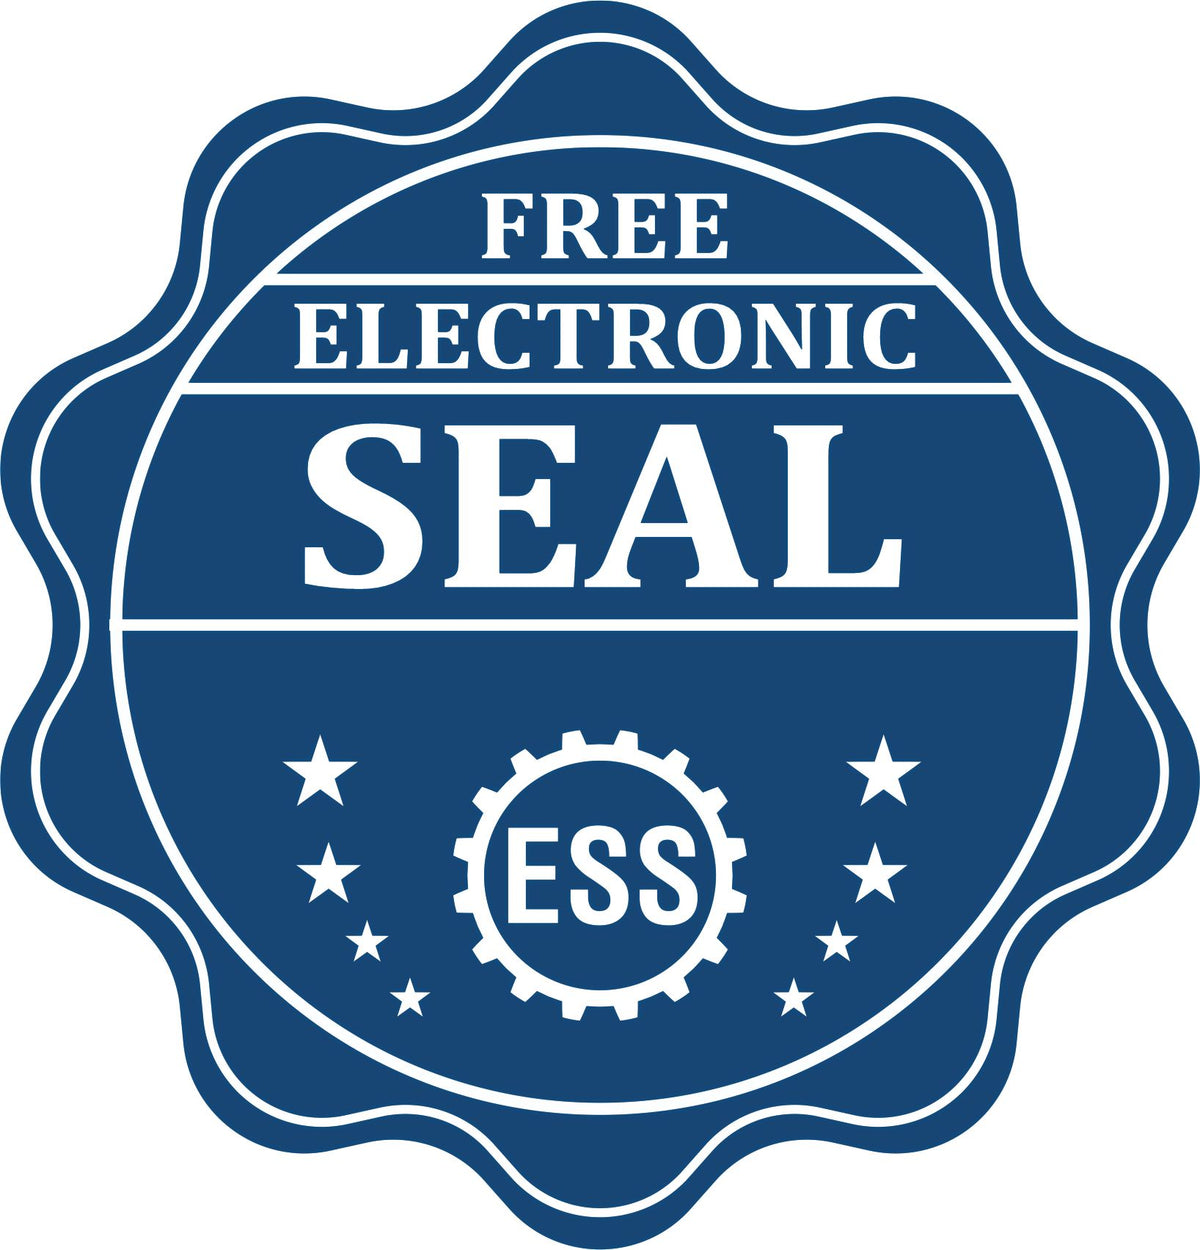 A badge showing a free electronic seal for the Gift North Carolina Geologist Seal with stars and the ESS gear on the emblem.